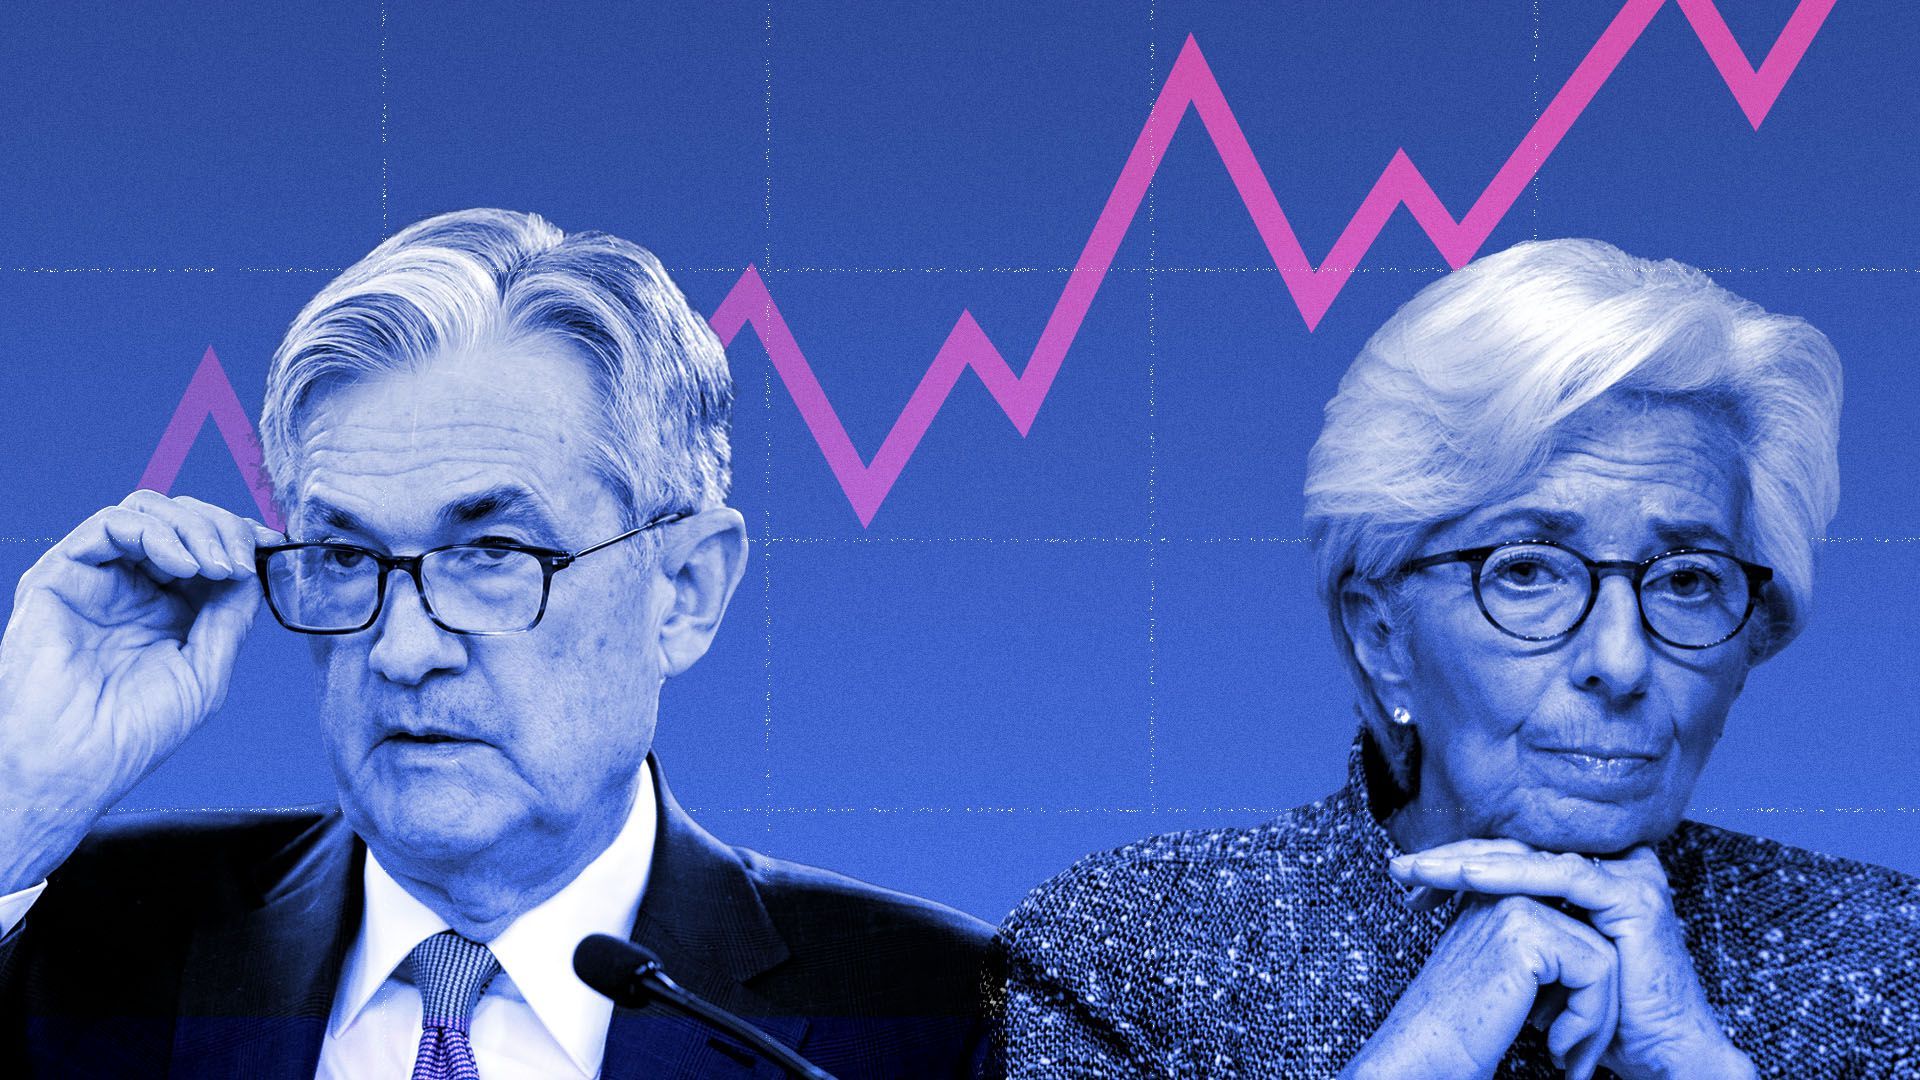 Photo illustration of Jerome Powell and Christine Lagarde with an upward trend line in the background.